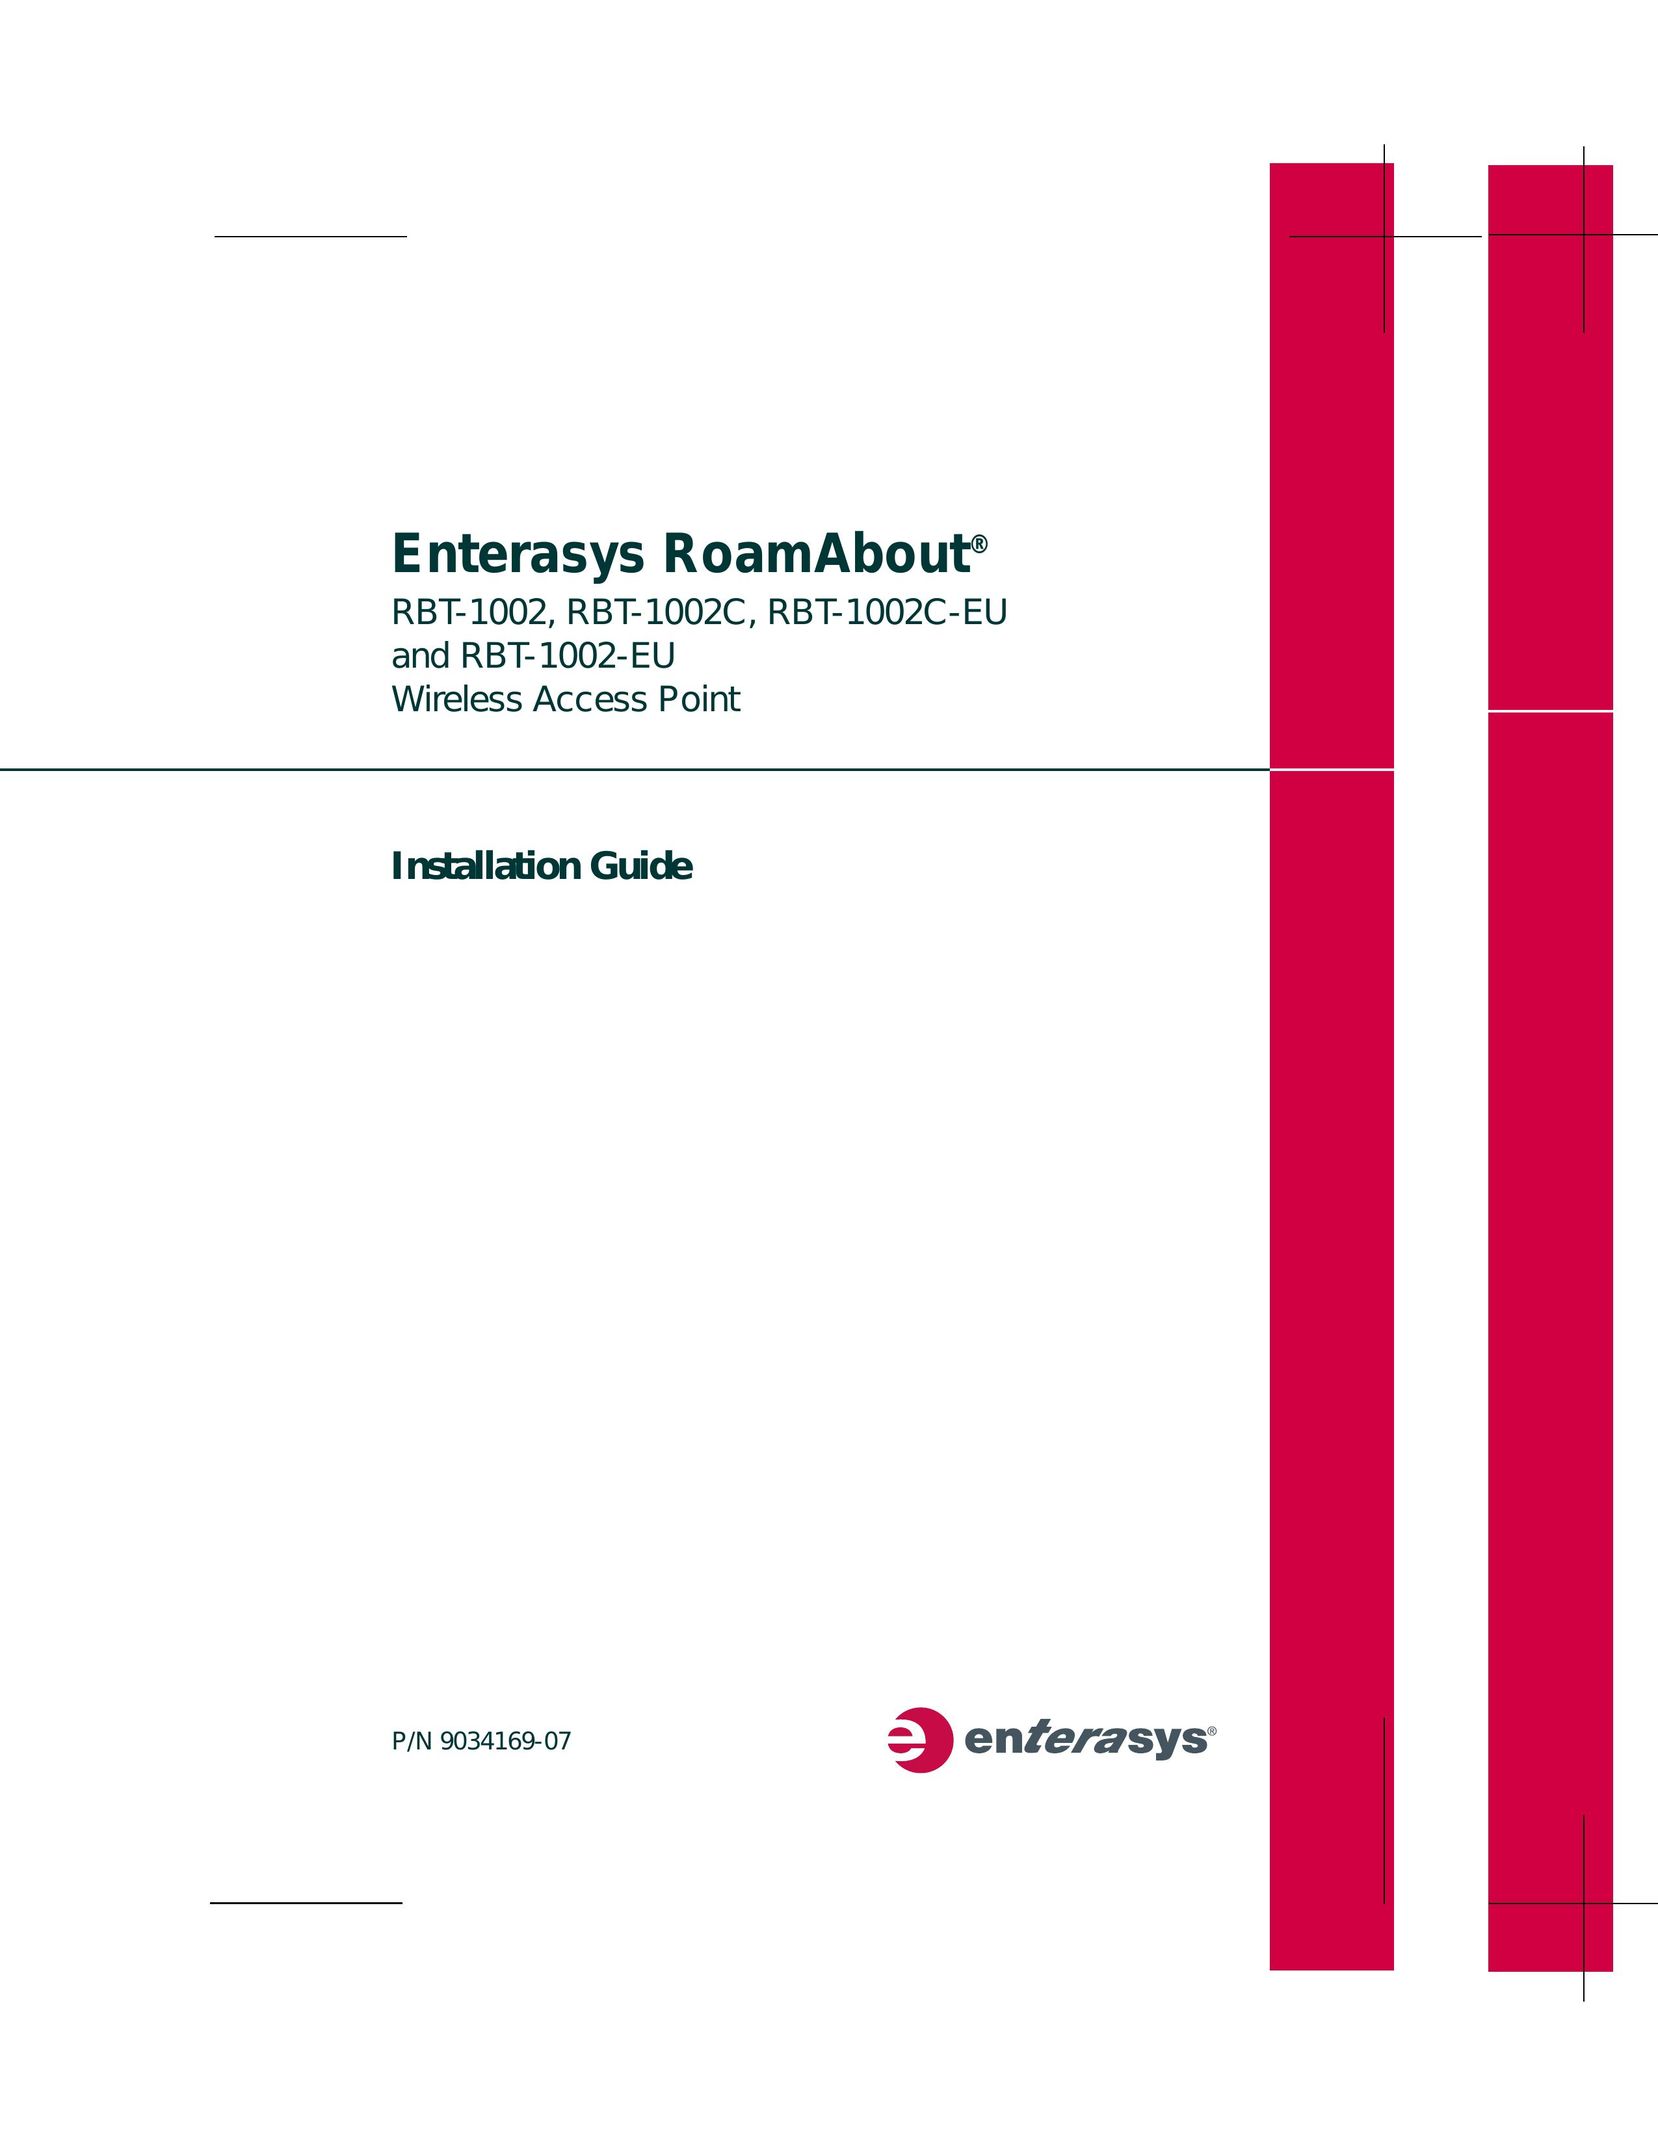 Enterasys Networks RBT-1002-EU Network Router User Manual